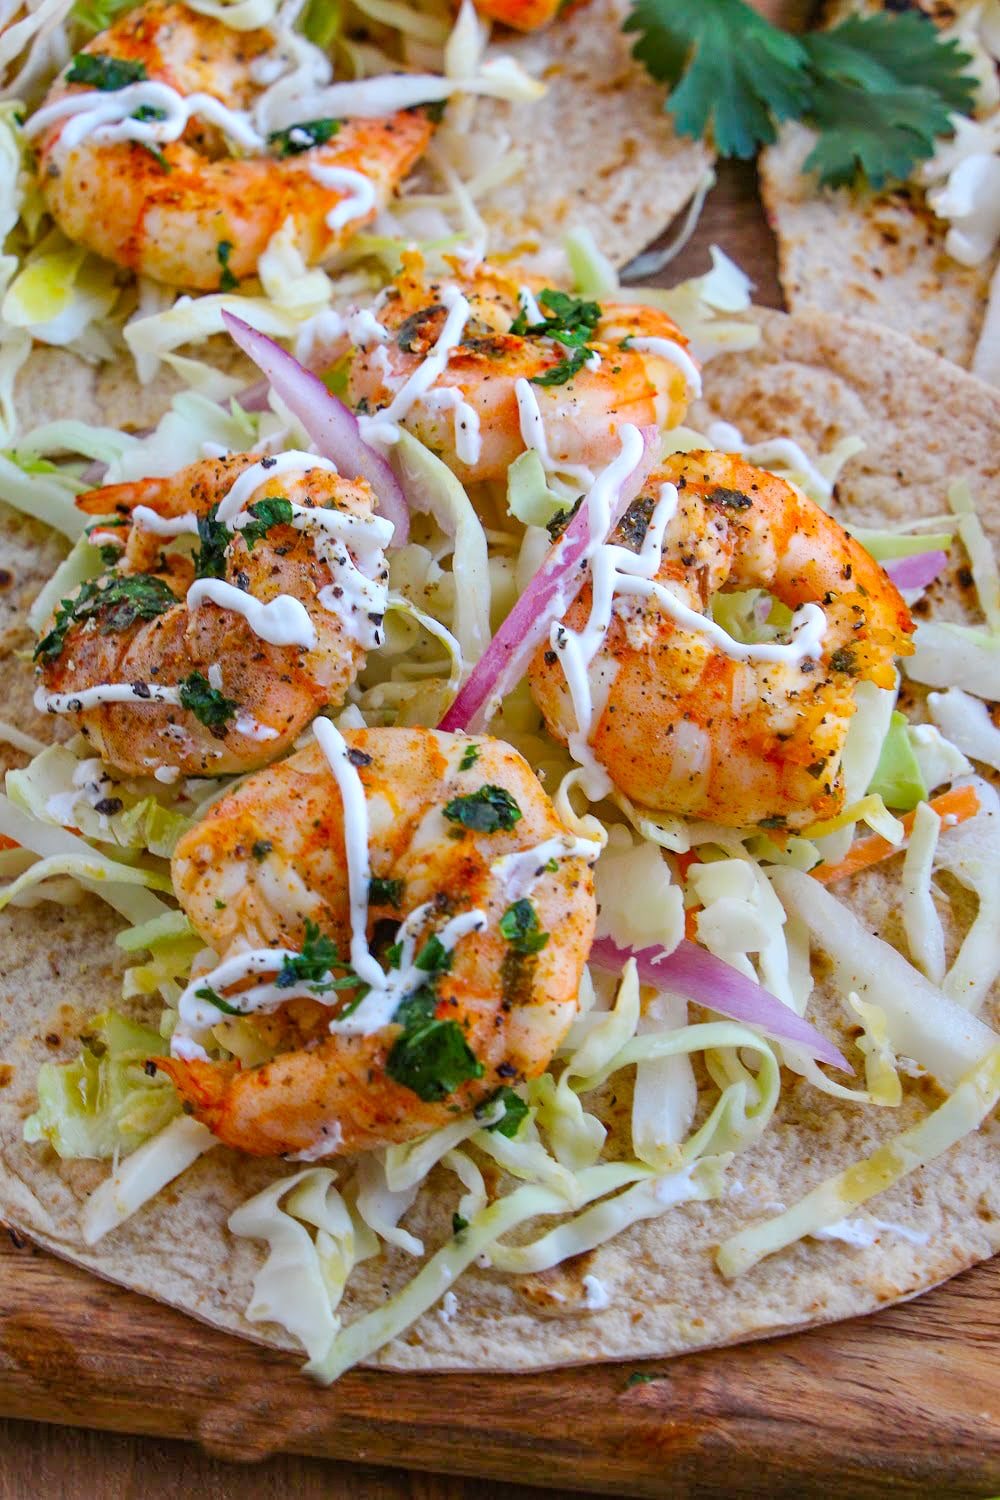 Seasoned Shrimp laying on a tortilla with slaw and red onions.